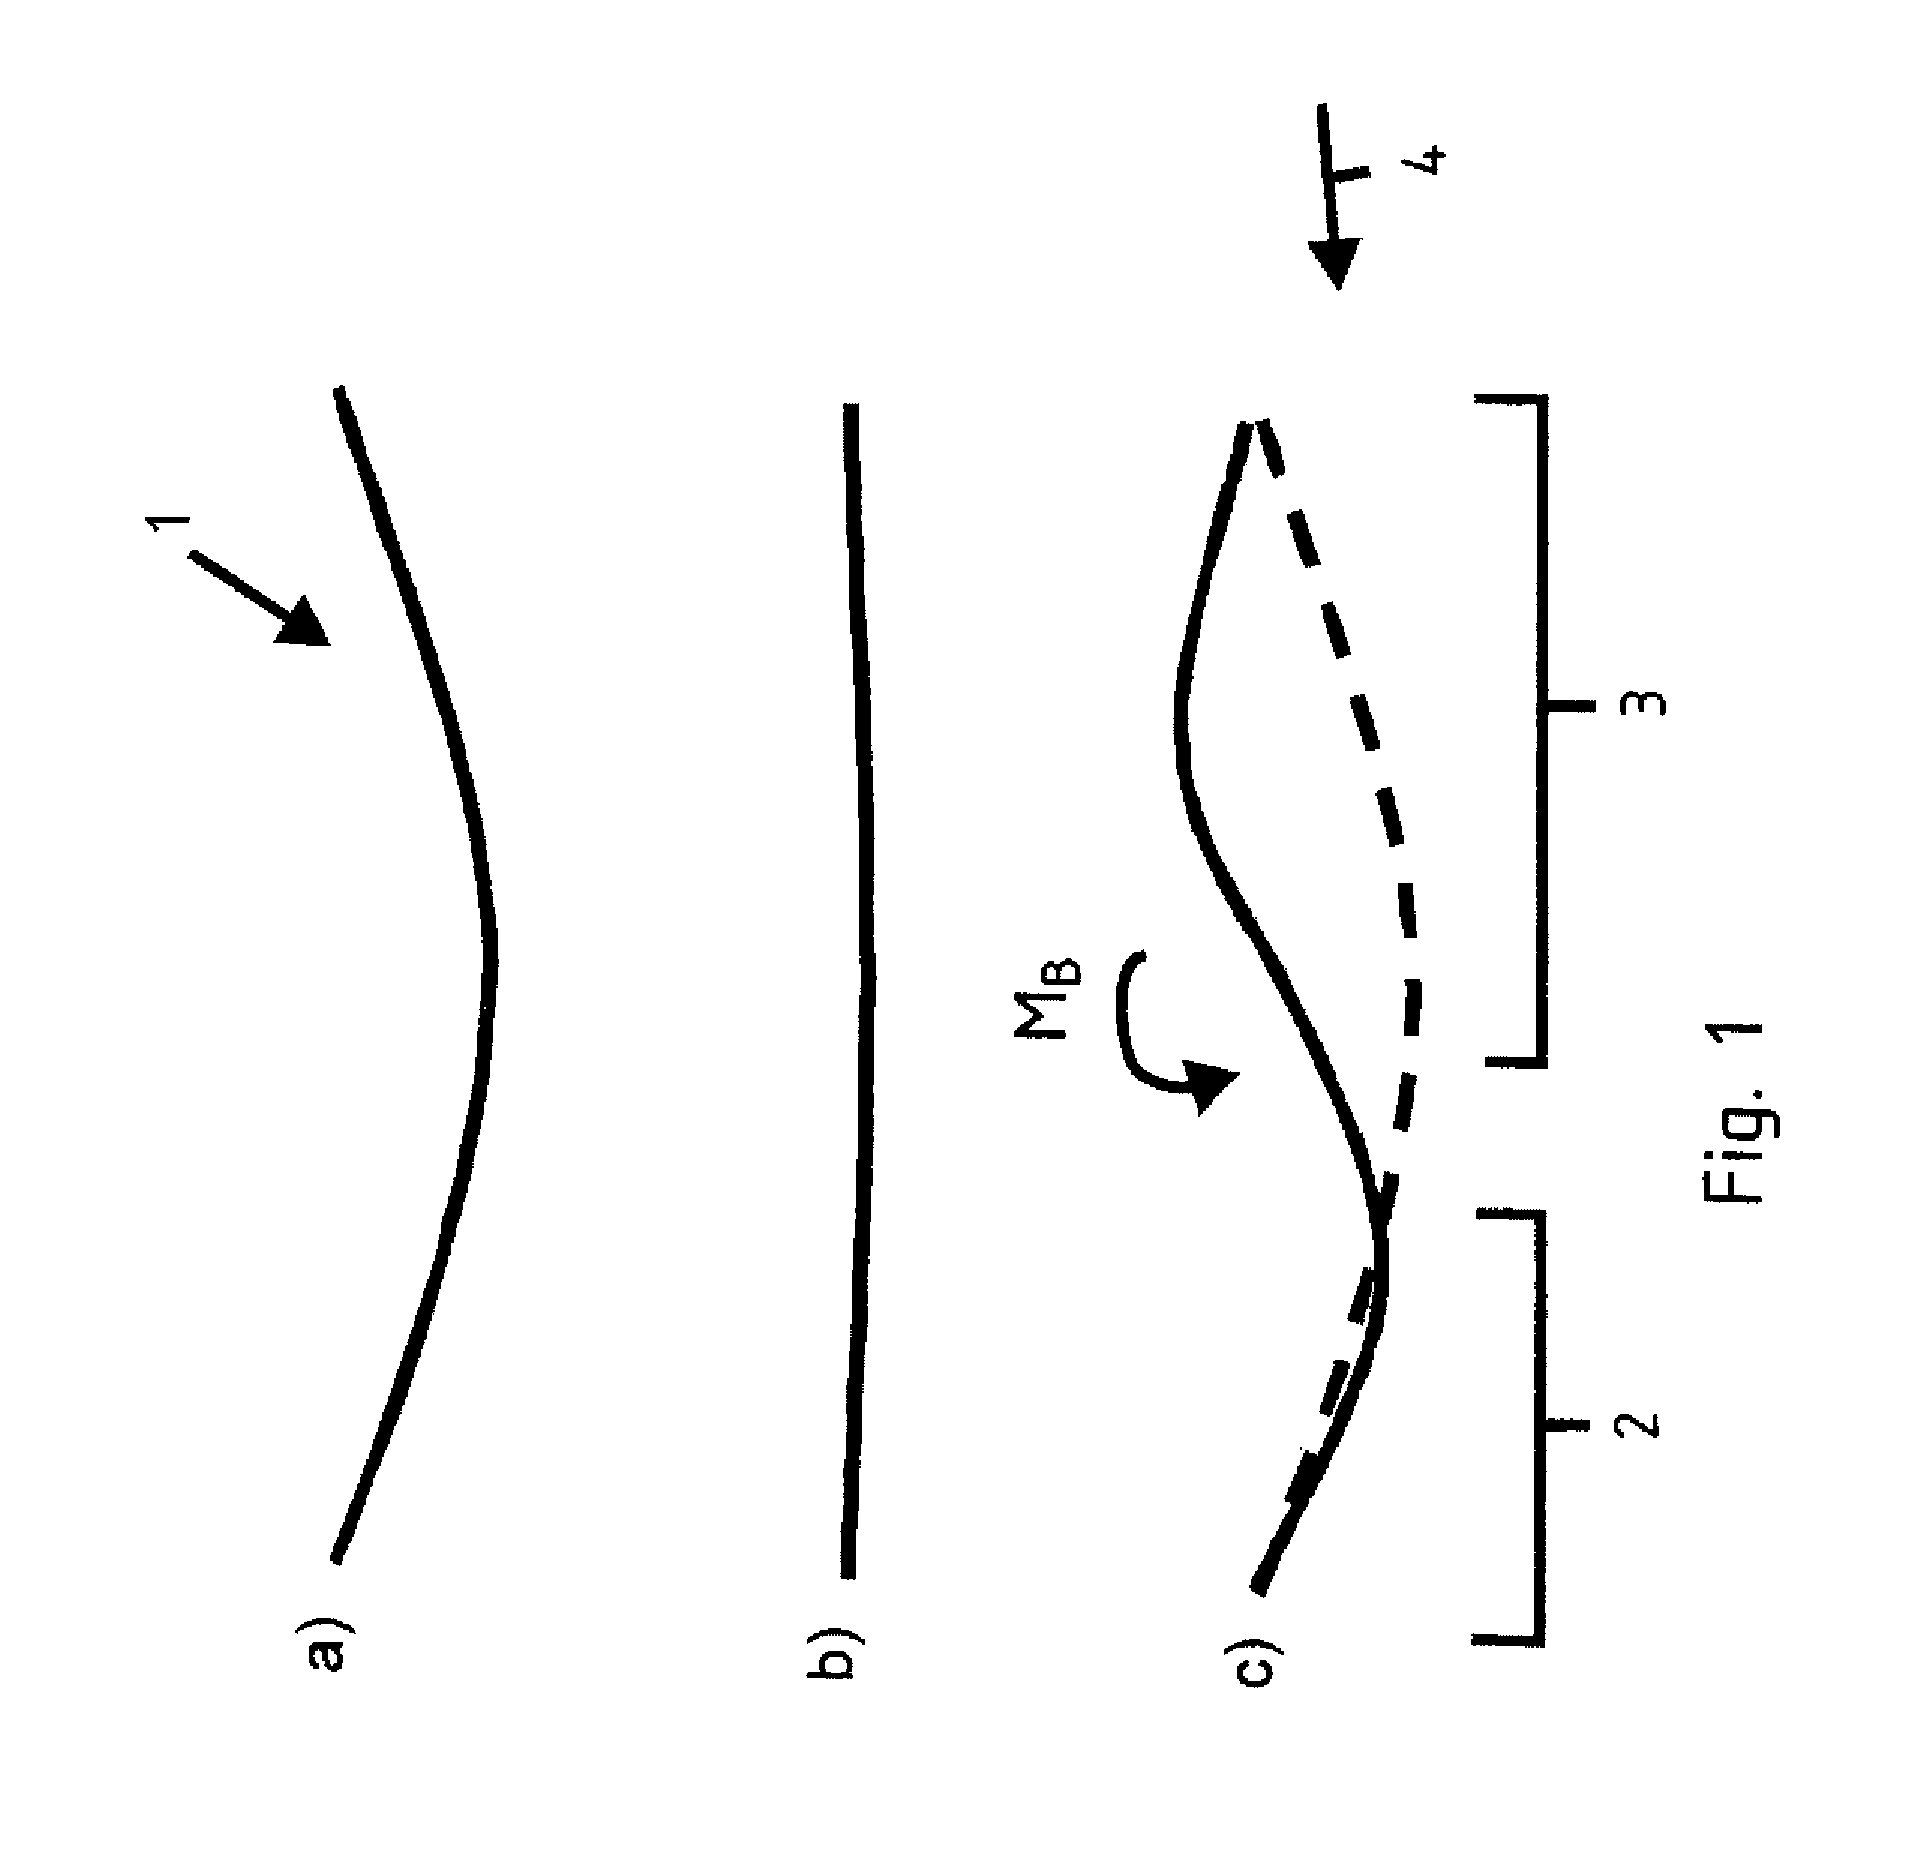 Axle suspension with longitudinal leaf spring for a motor vehicle